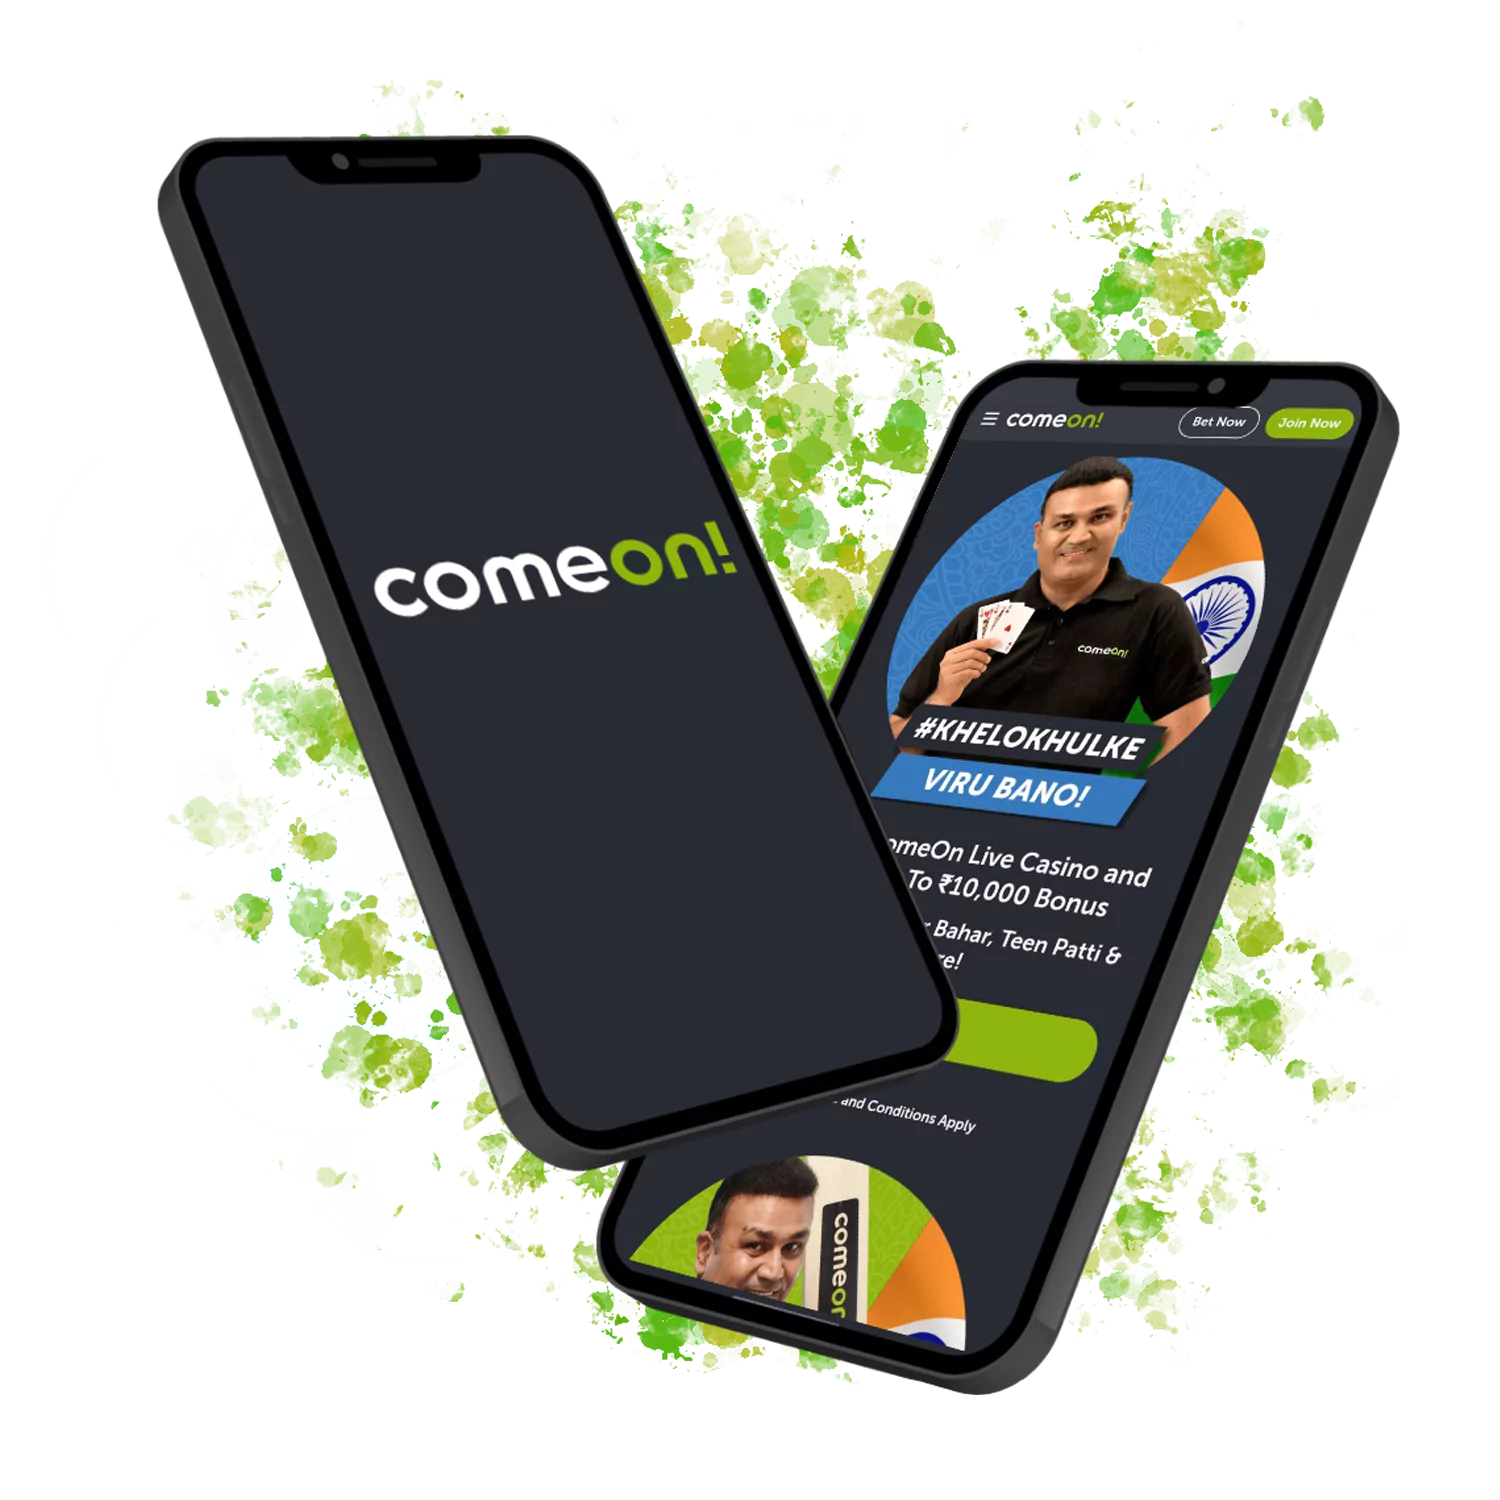 If you are a real fan of betting, you can download the app of Comeon to place bets from anywhere.